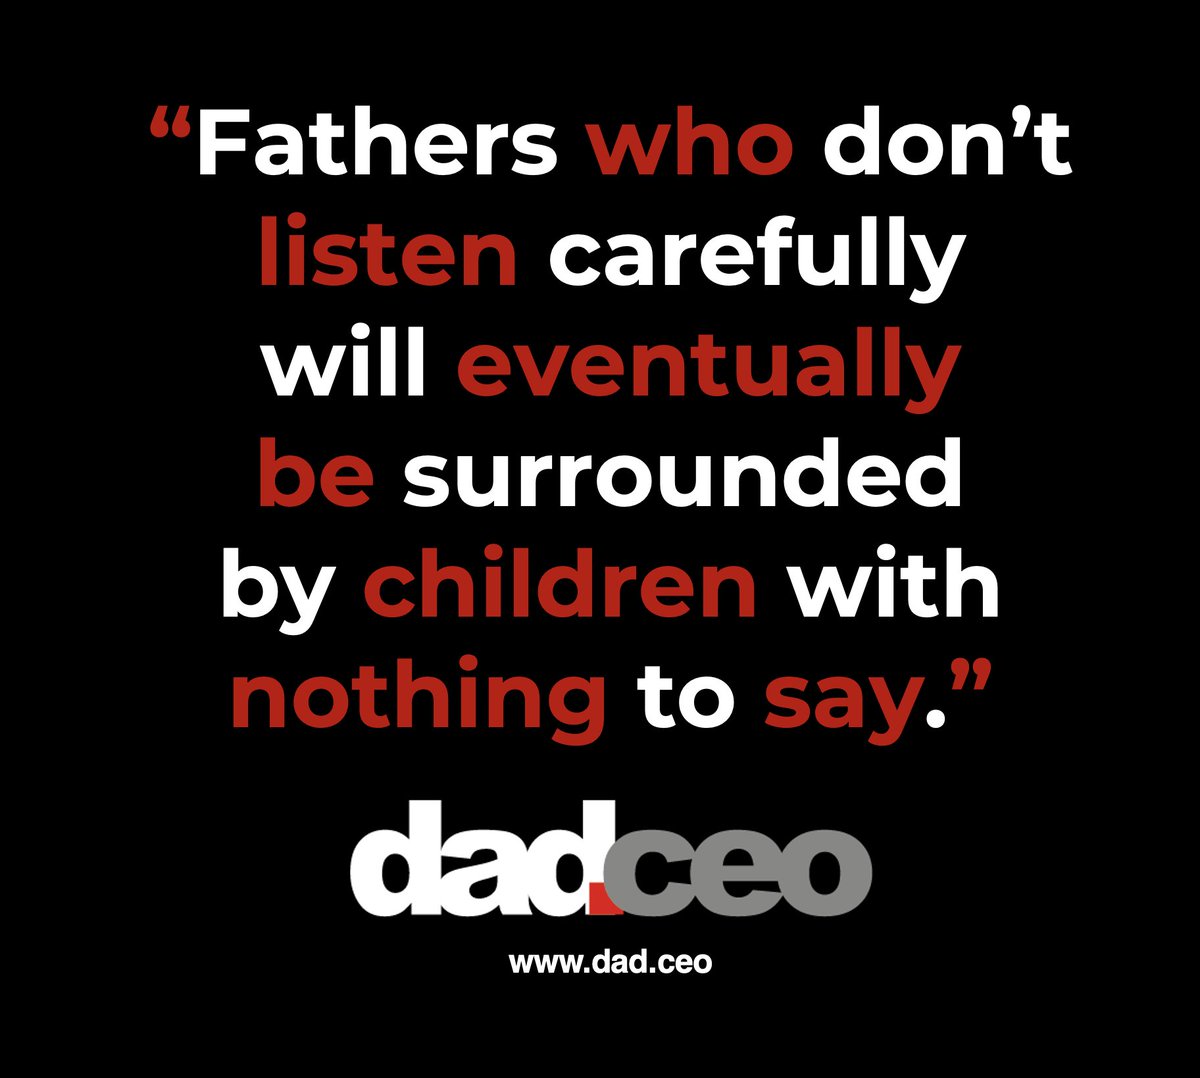 There's a reason we have 2 ears and 1 mouth. Use them wisely for a better conversation.

dad.ceo

#ceolife #listenbetter #dadceo1 #dadceo #ceoadvice #bepresent #leadershipadvice #presencenotpresents #ceowisdom #dadwisdom #ceo #listencarefully #listentoyourkids